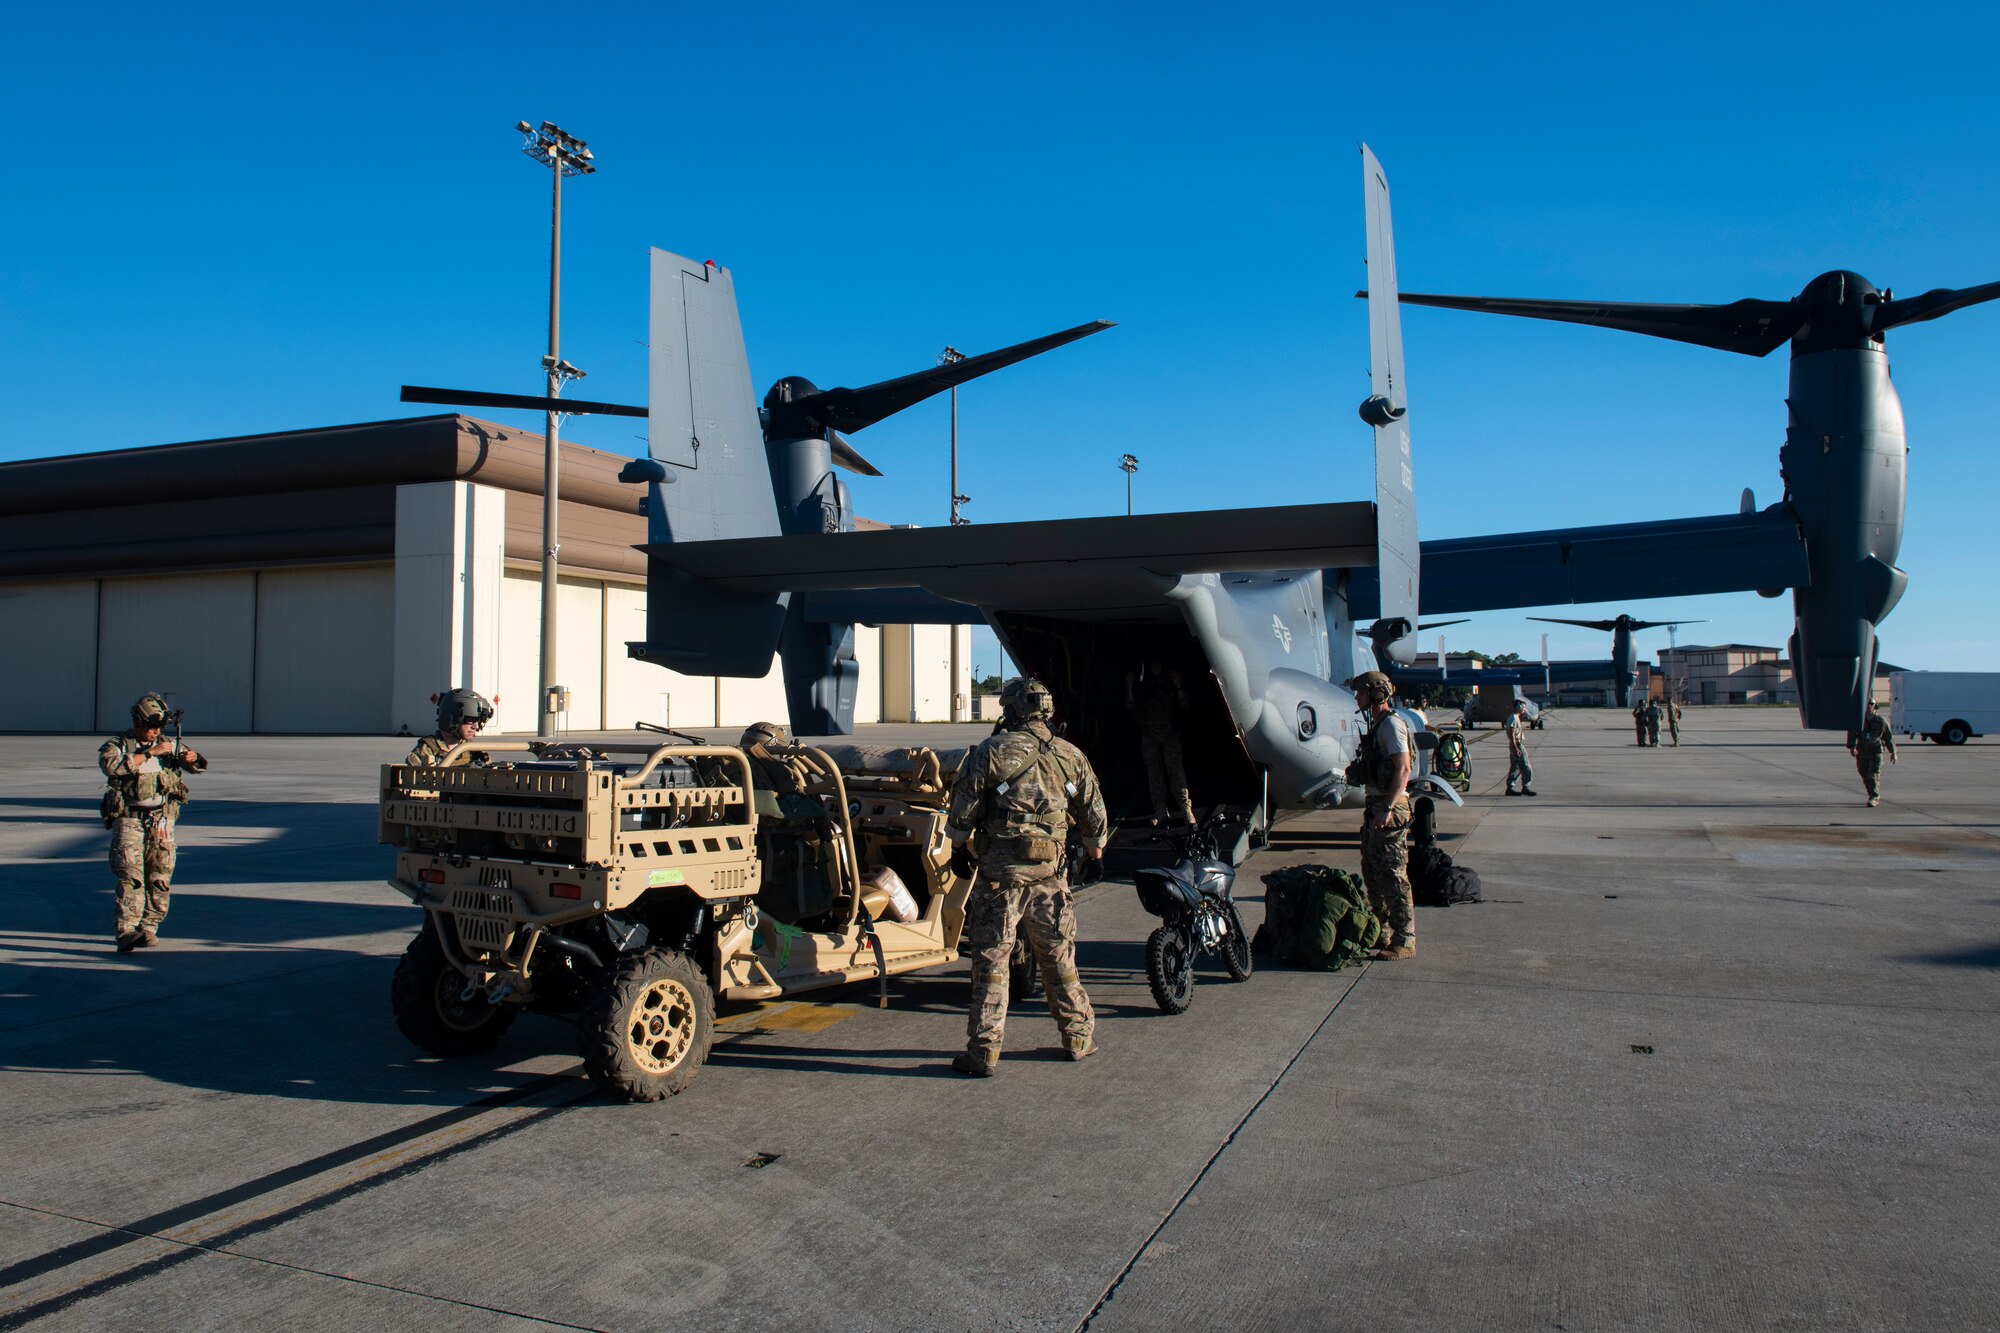 U.S. Air Force Special Tactics Airmen with the 23rd Special Tactics Squadron load cargo onto a CV-22 Osprey tiltrotor aircraft assigned to the 8th Special Operations Squadron at Hurlburt Field, Florida, Oct. 11, 2018.